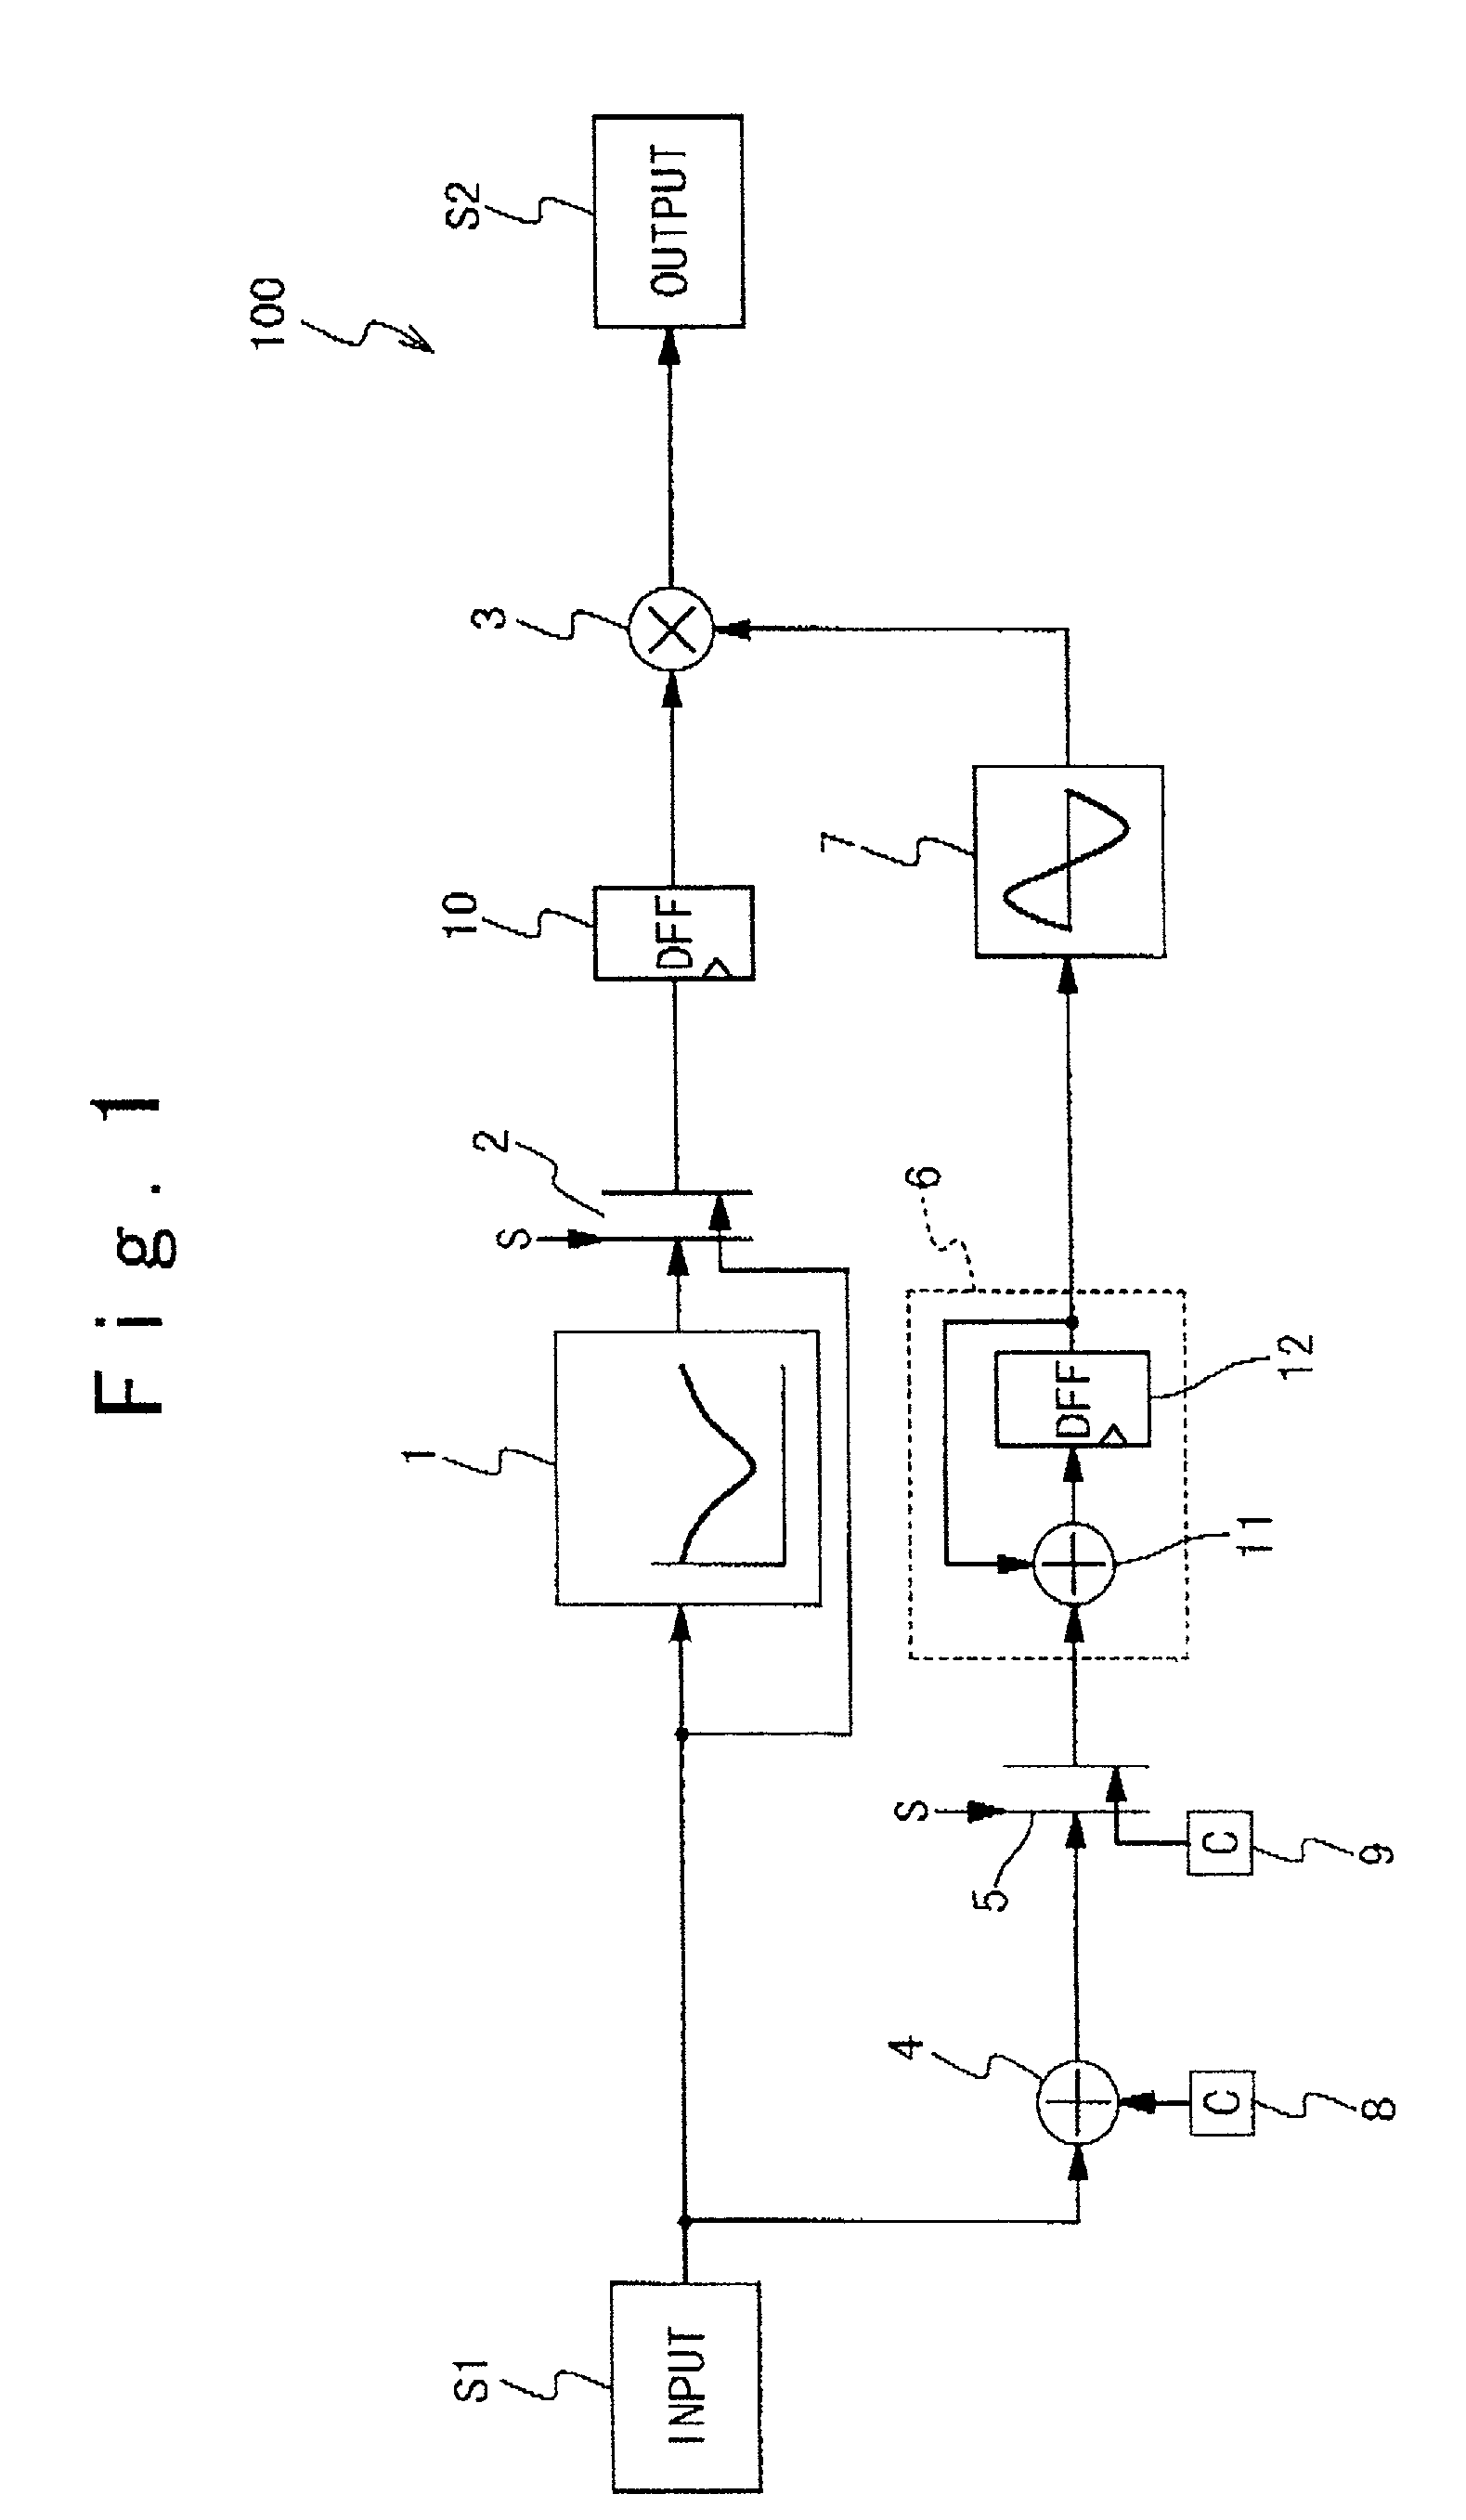 Video signal processing circuit that can correspond to a plurality of television signal methods